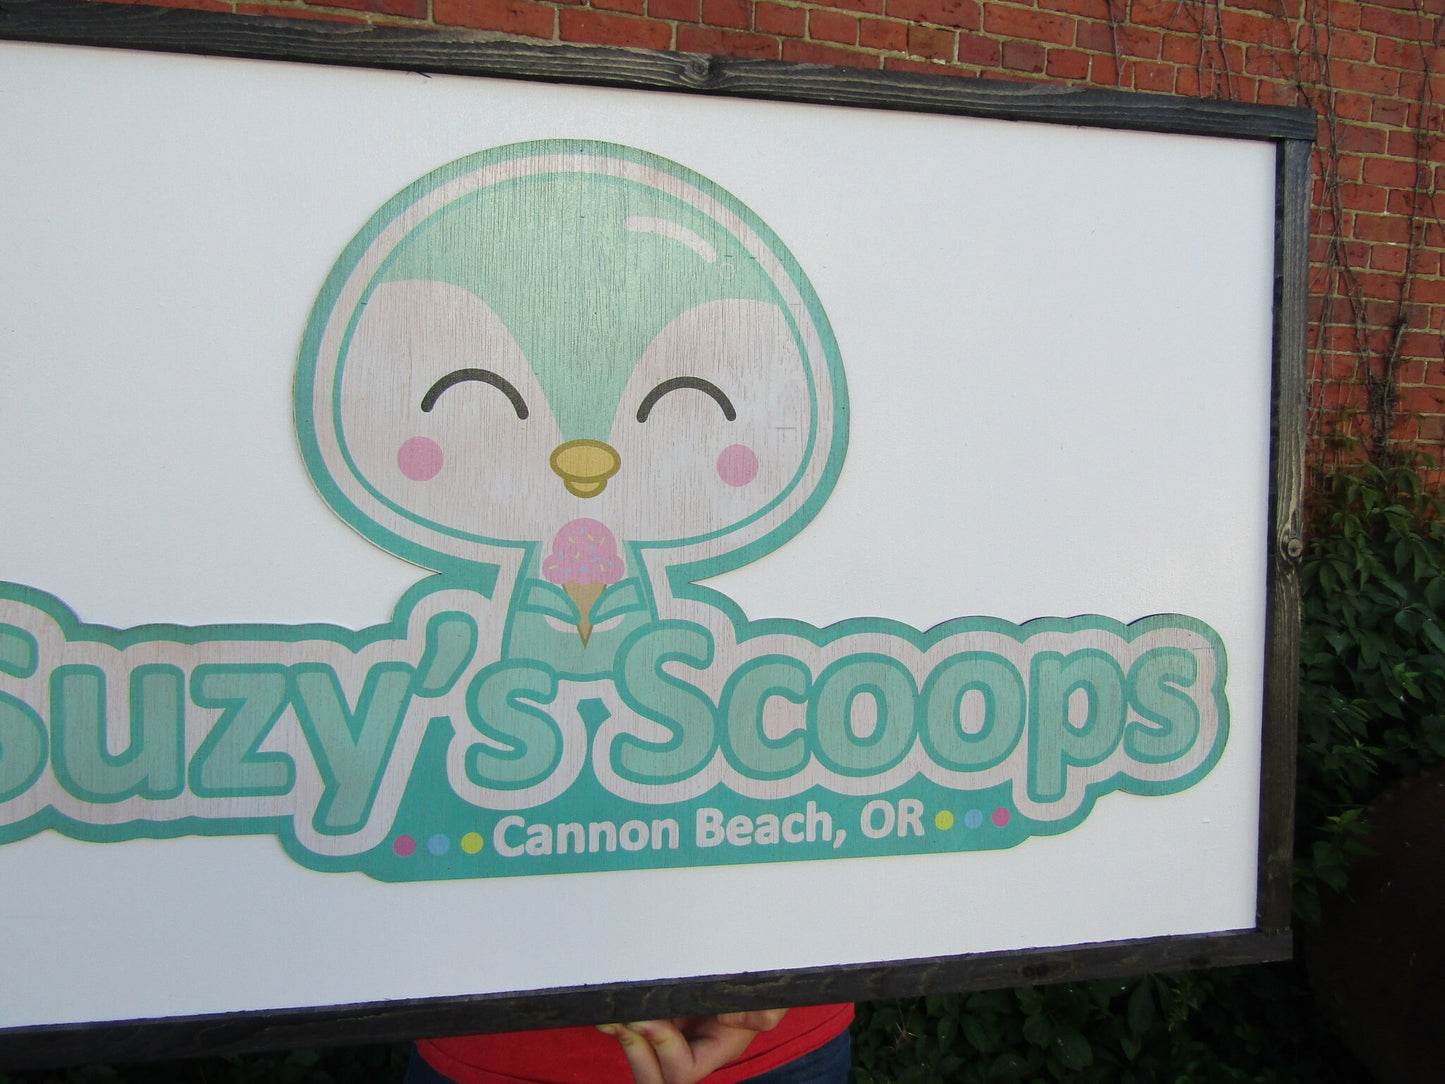 Cute Outdoor Ice Cream Scoops Shop Teal Mint Color Penguin Printed Hanging Sign Logo Image Custom Personalized Handmade Made To Order Wooden